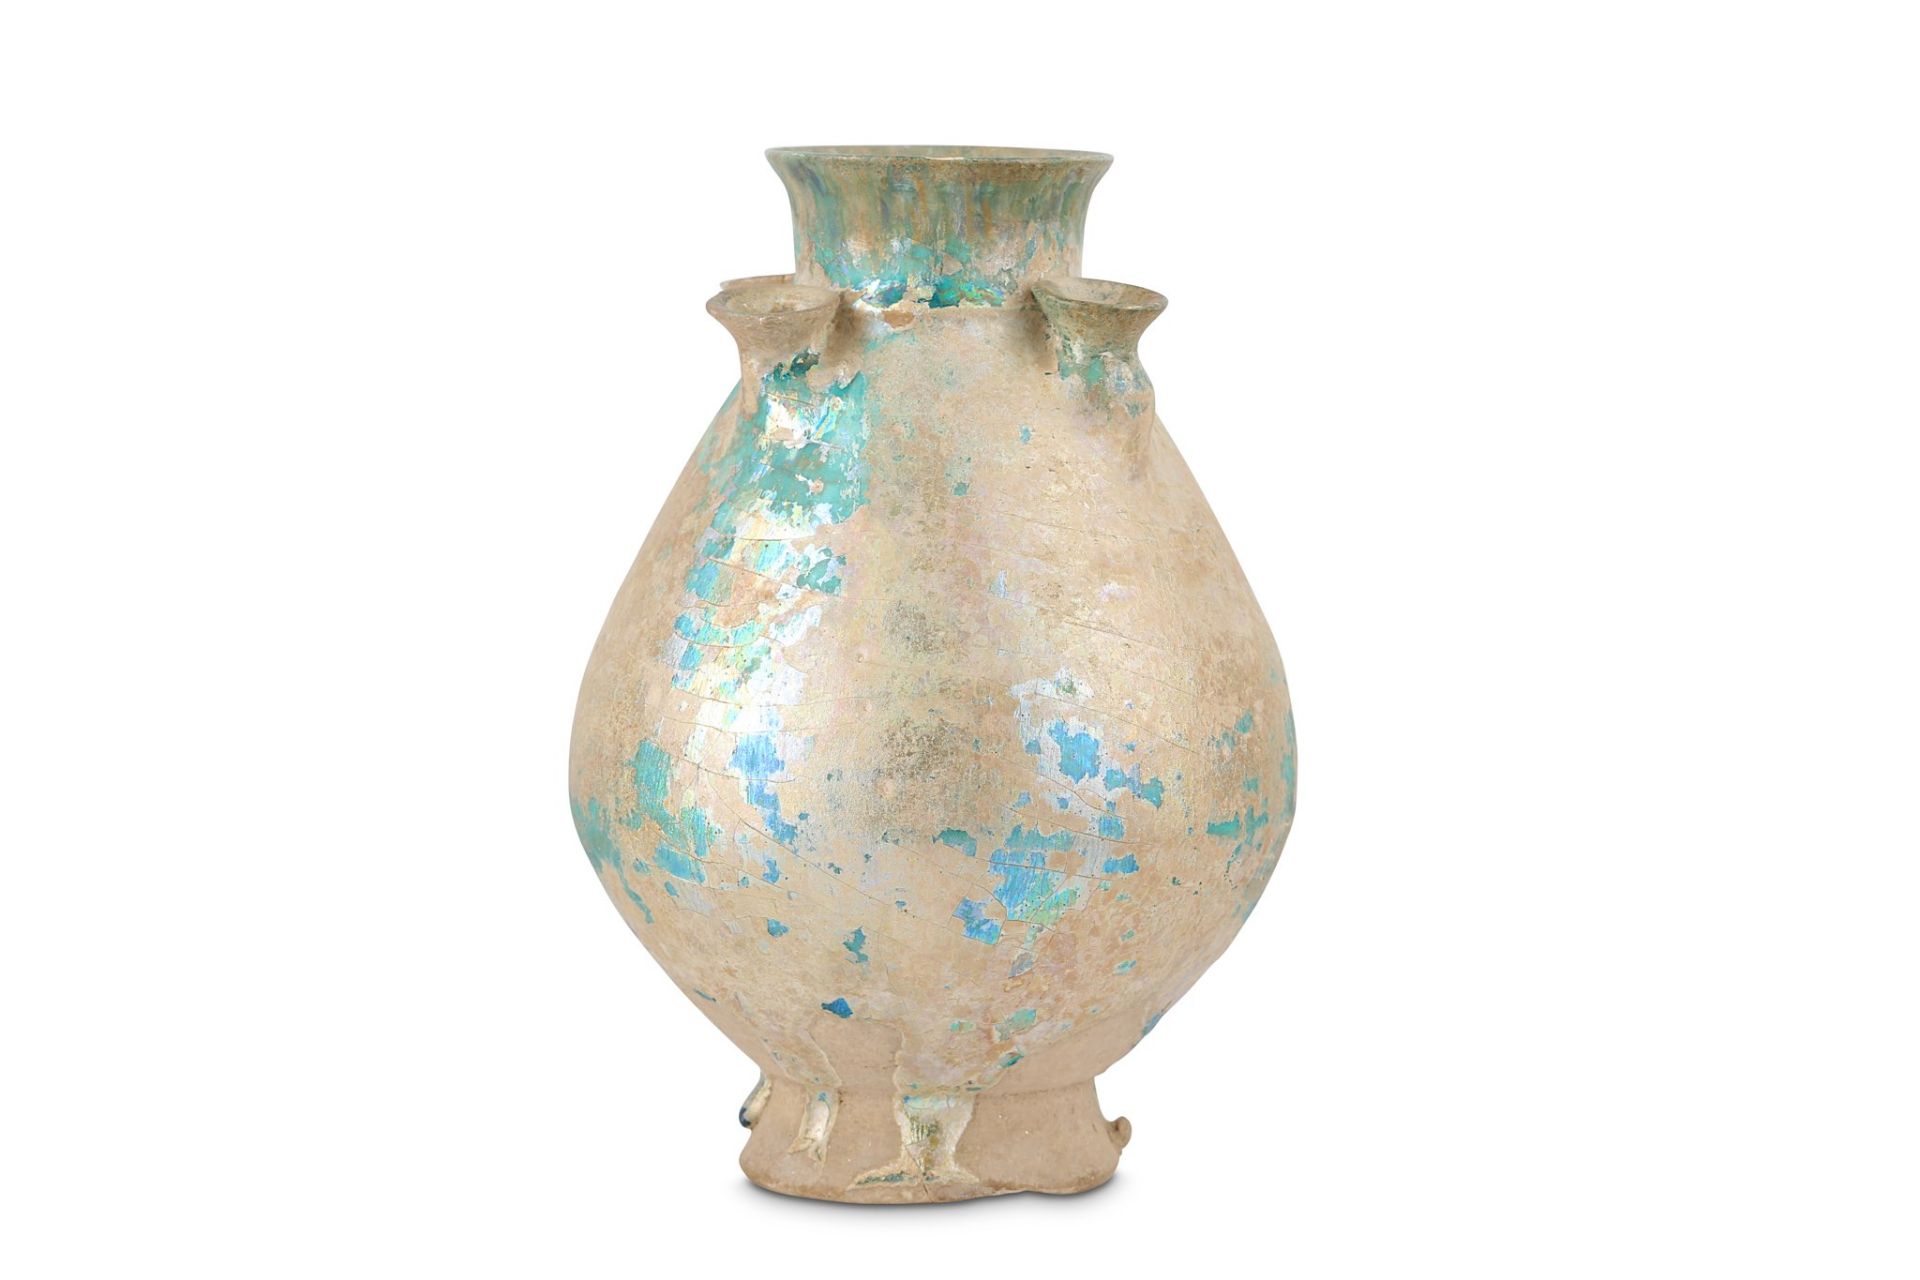 A TURQUOISE-GLAZED POTTERY VASE WITH FOUR SPOUTS Kashan, Iran, 12th - 13th century Of pyriform